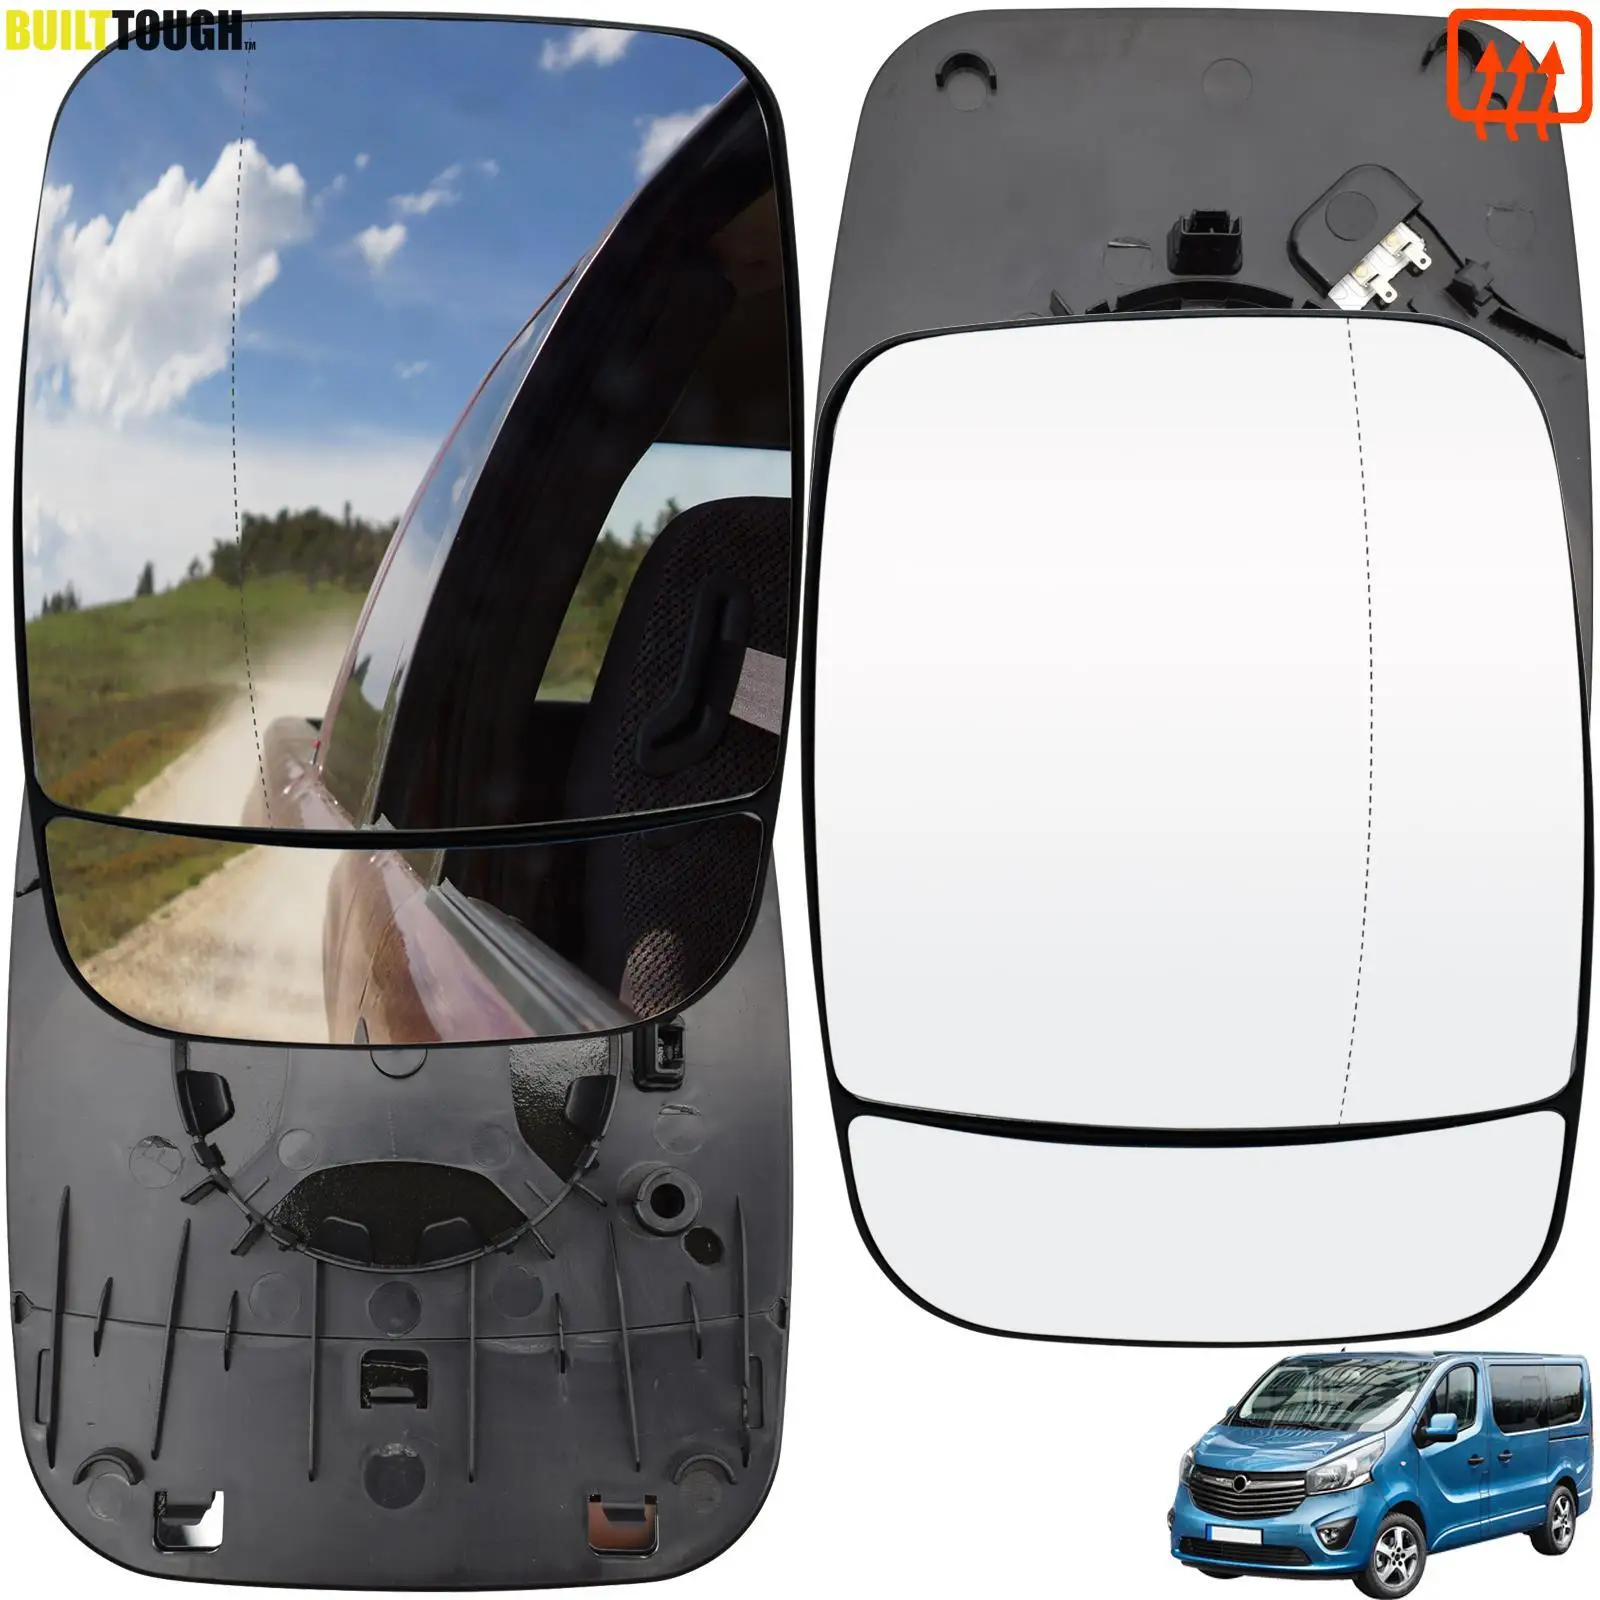 

For Opel / Vauxhall Vivaro Renault Trafic 2014 - Mitsubishi Express Left Right Side Wing Mirror Glass Heated Blind Spot Rearview